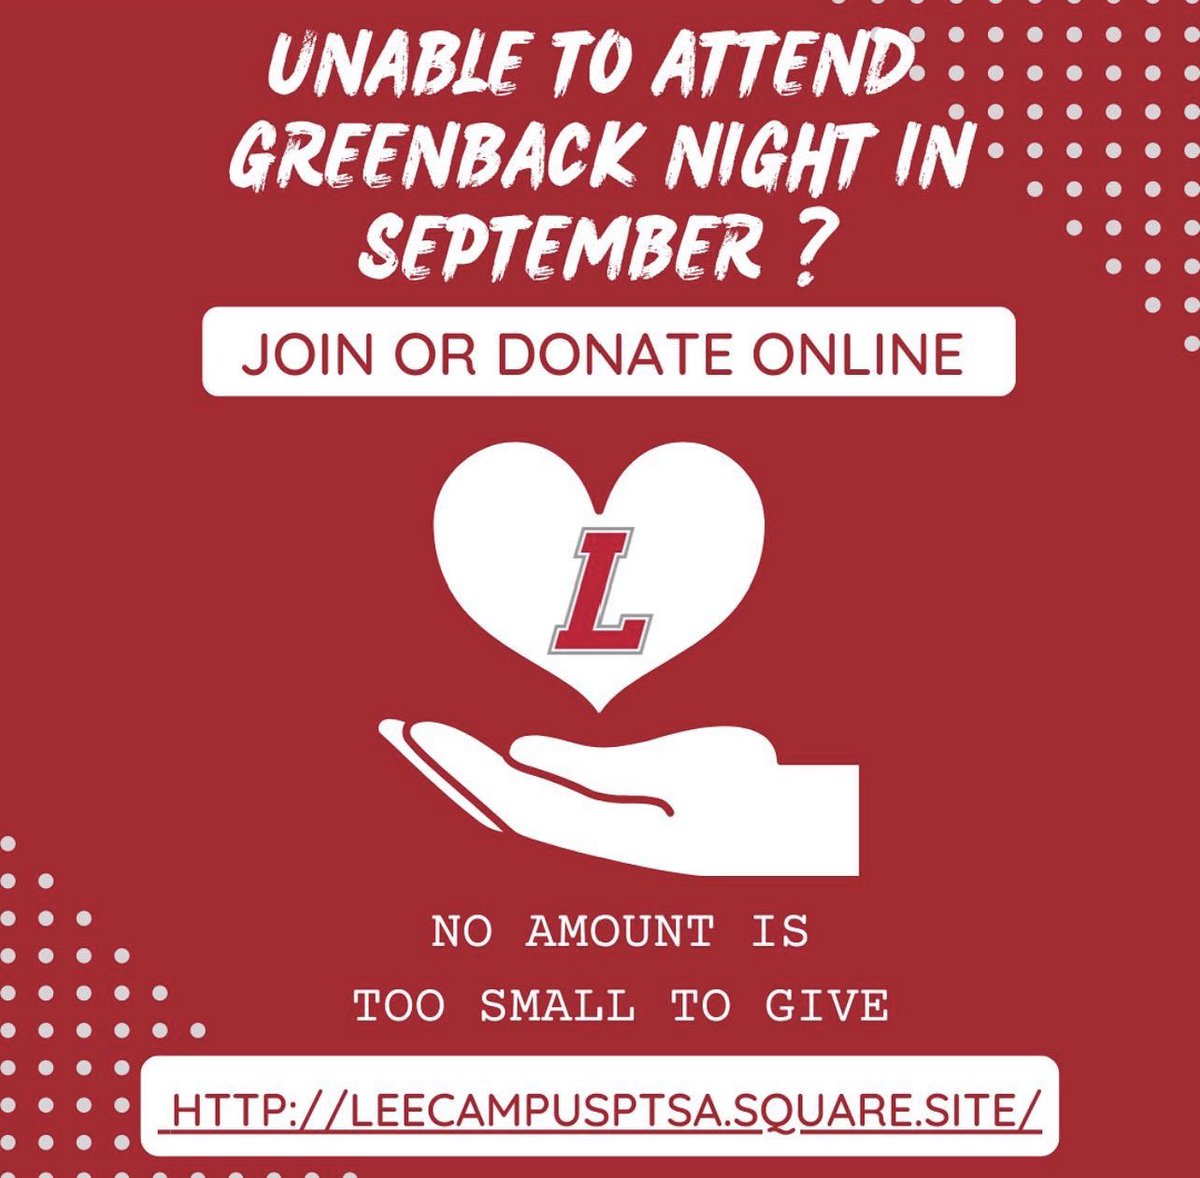 Greenback is tonight! Unable to attend visit our site to donate leecampusptsa.square.site